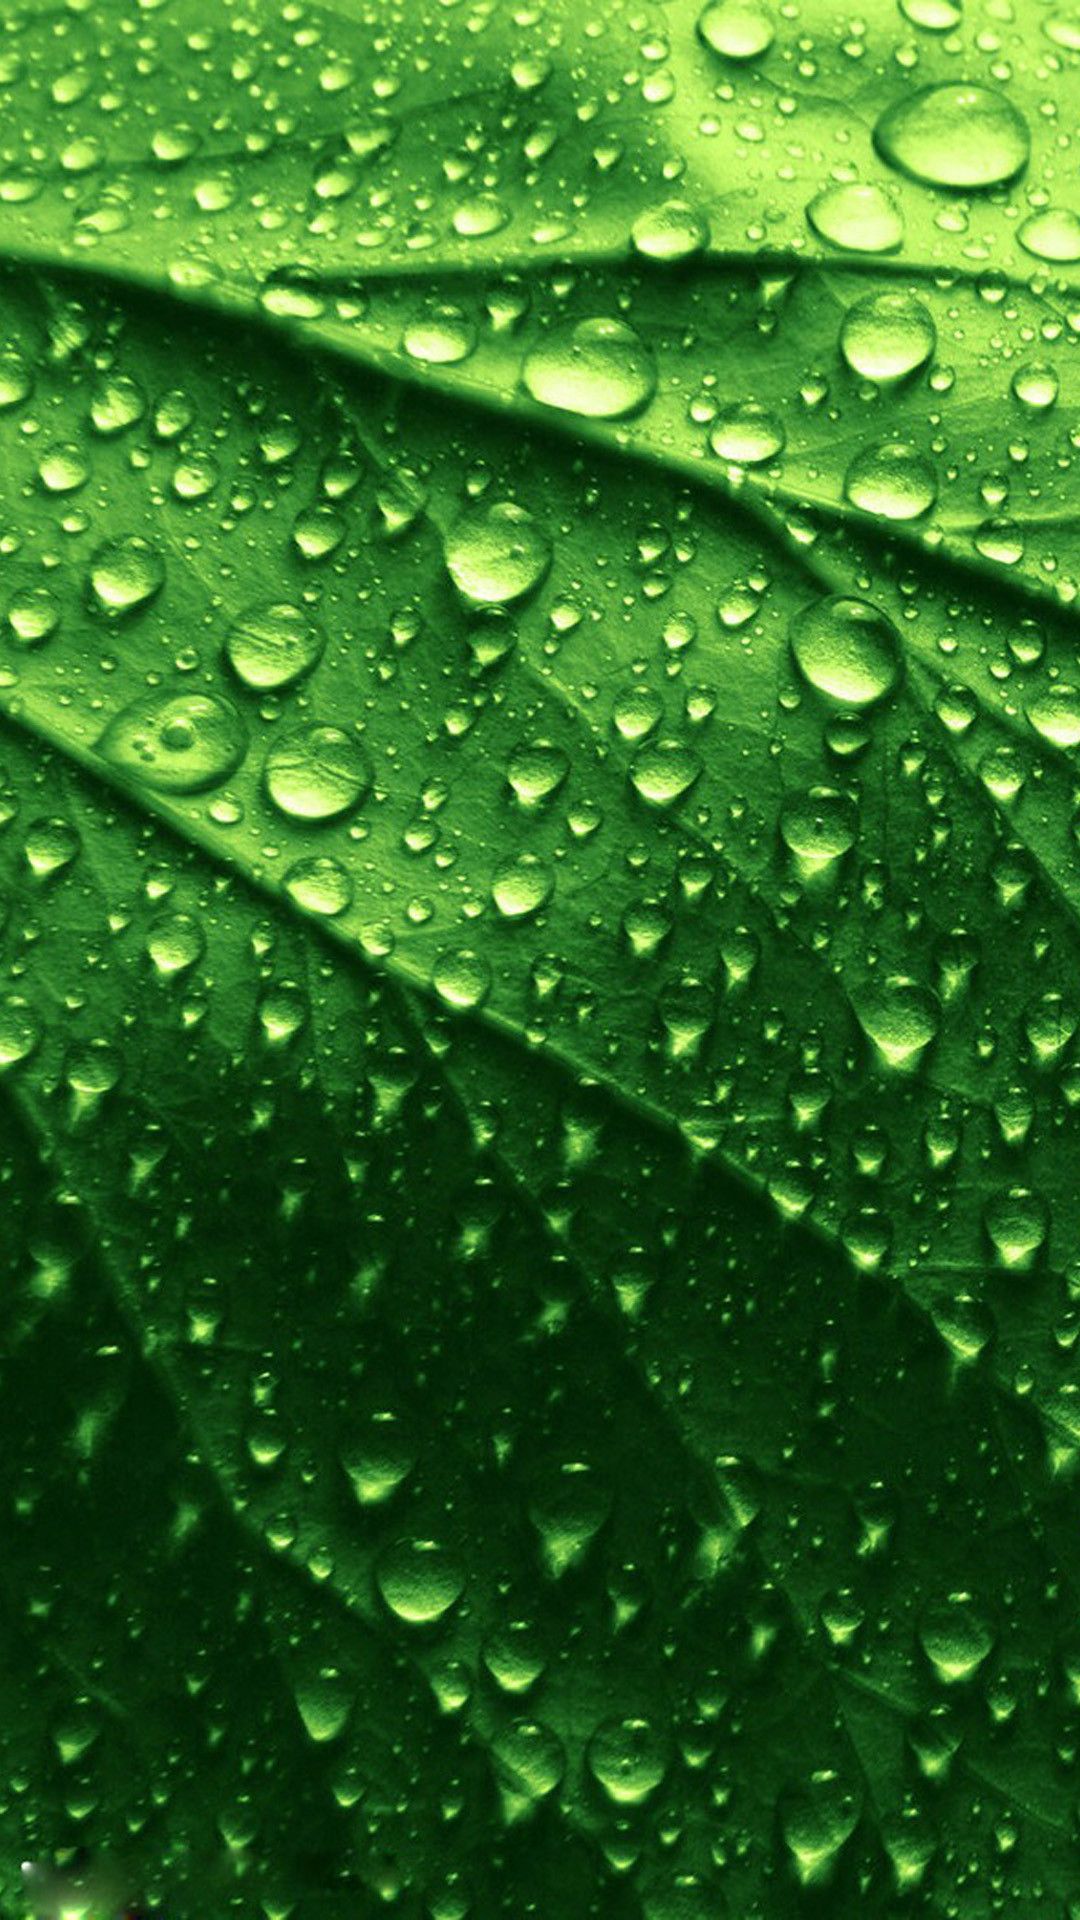 Hd Green Leaves And Water Drops iPhone 6 Plus Wallpaper Drops On Leaf HD Wallpaper